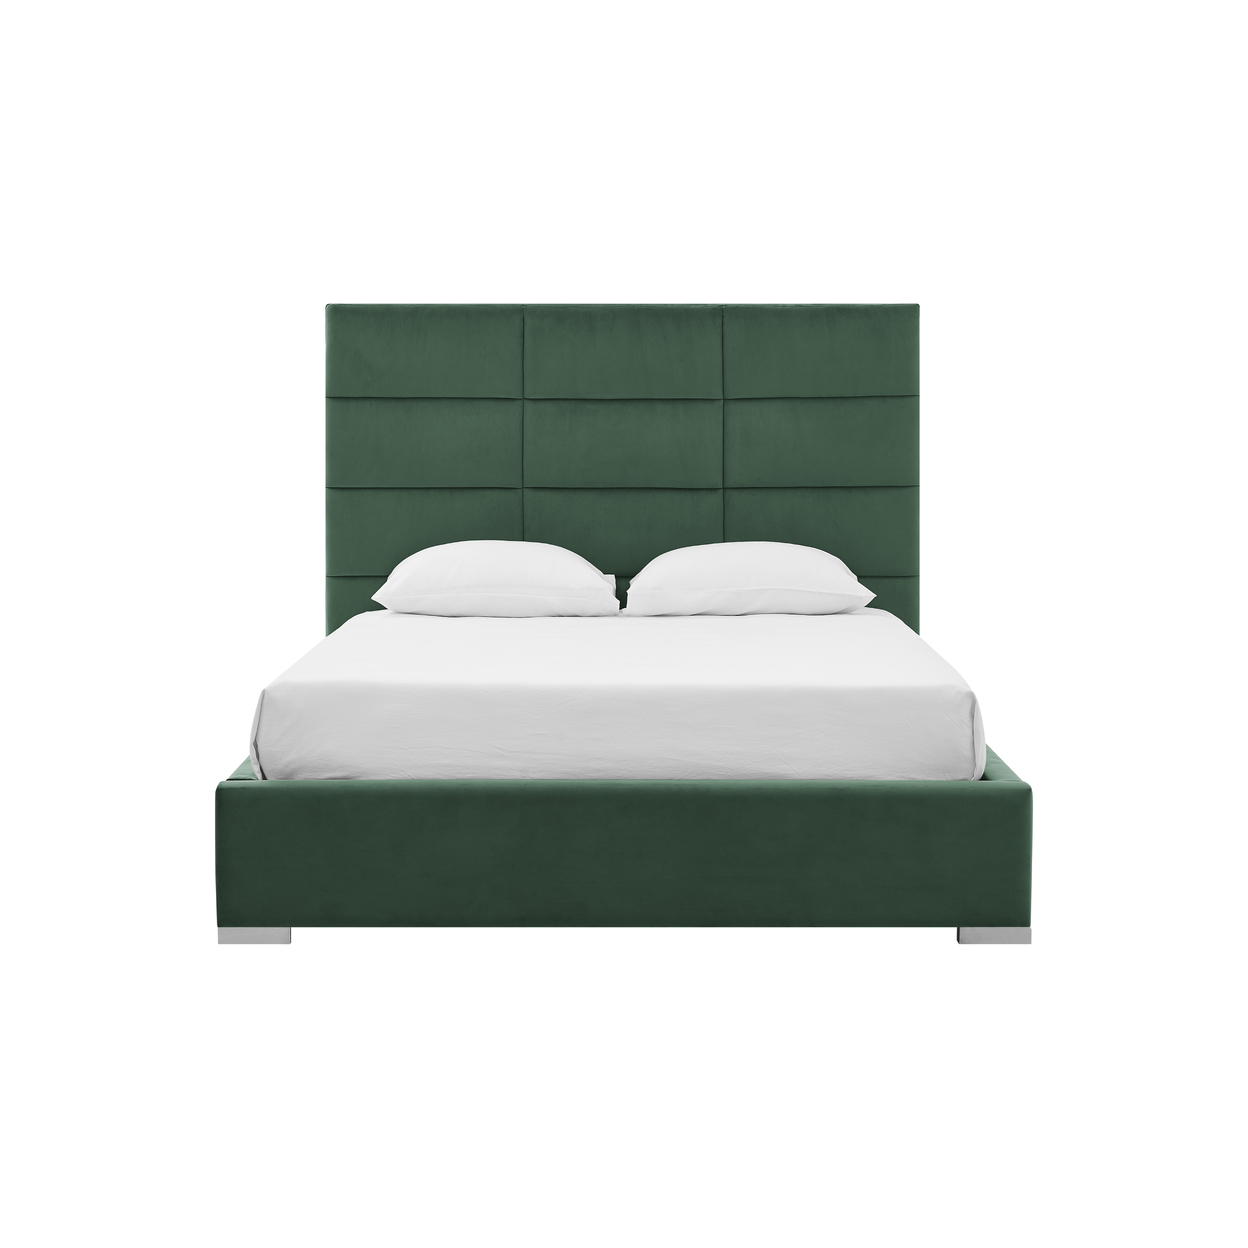 Iconic Home Durazzo Storage Platform Bed Frame With Headboard Velvet Upholstered Box Quilted, Modern Contemporary - Dark Green, Twin